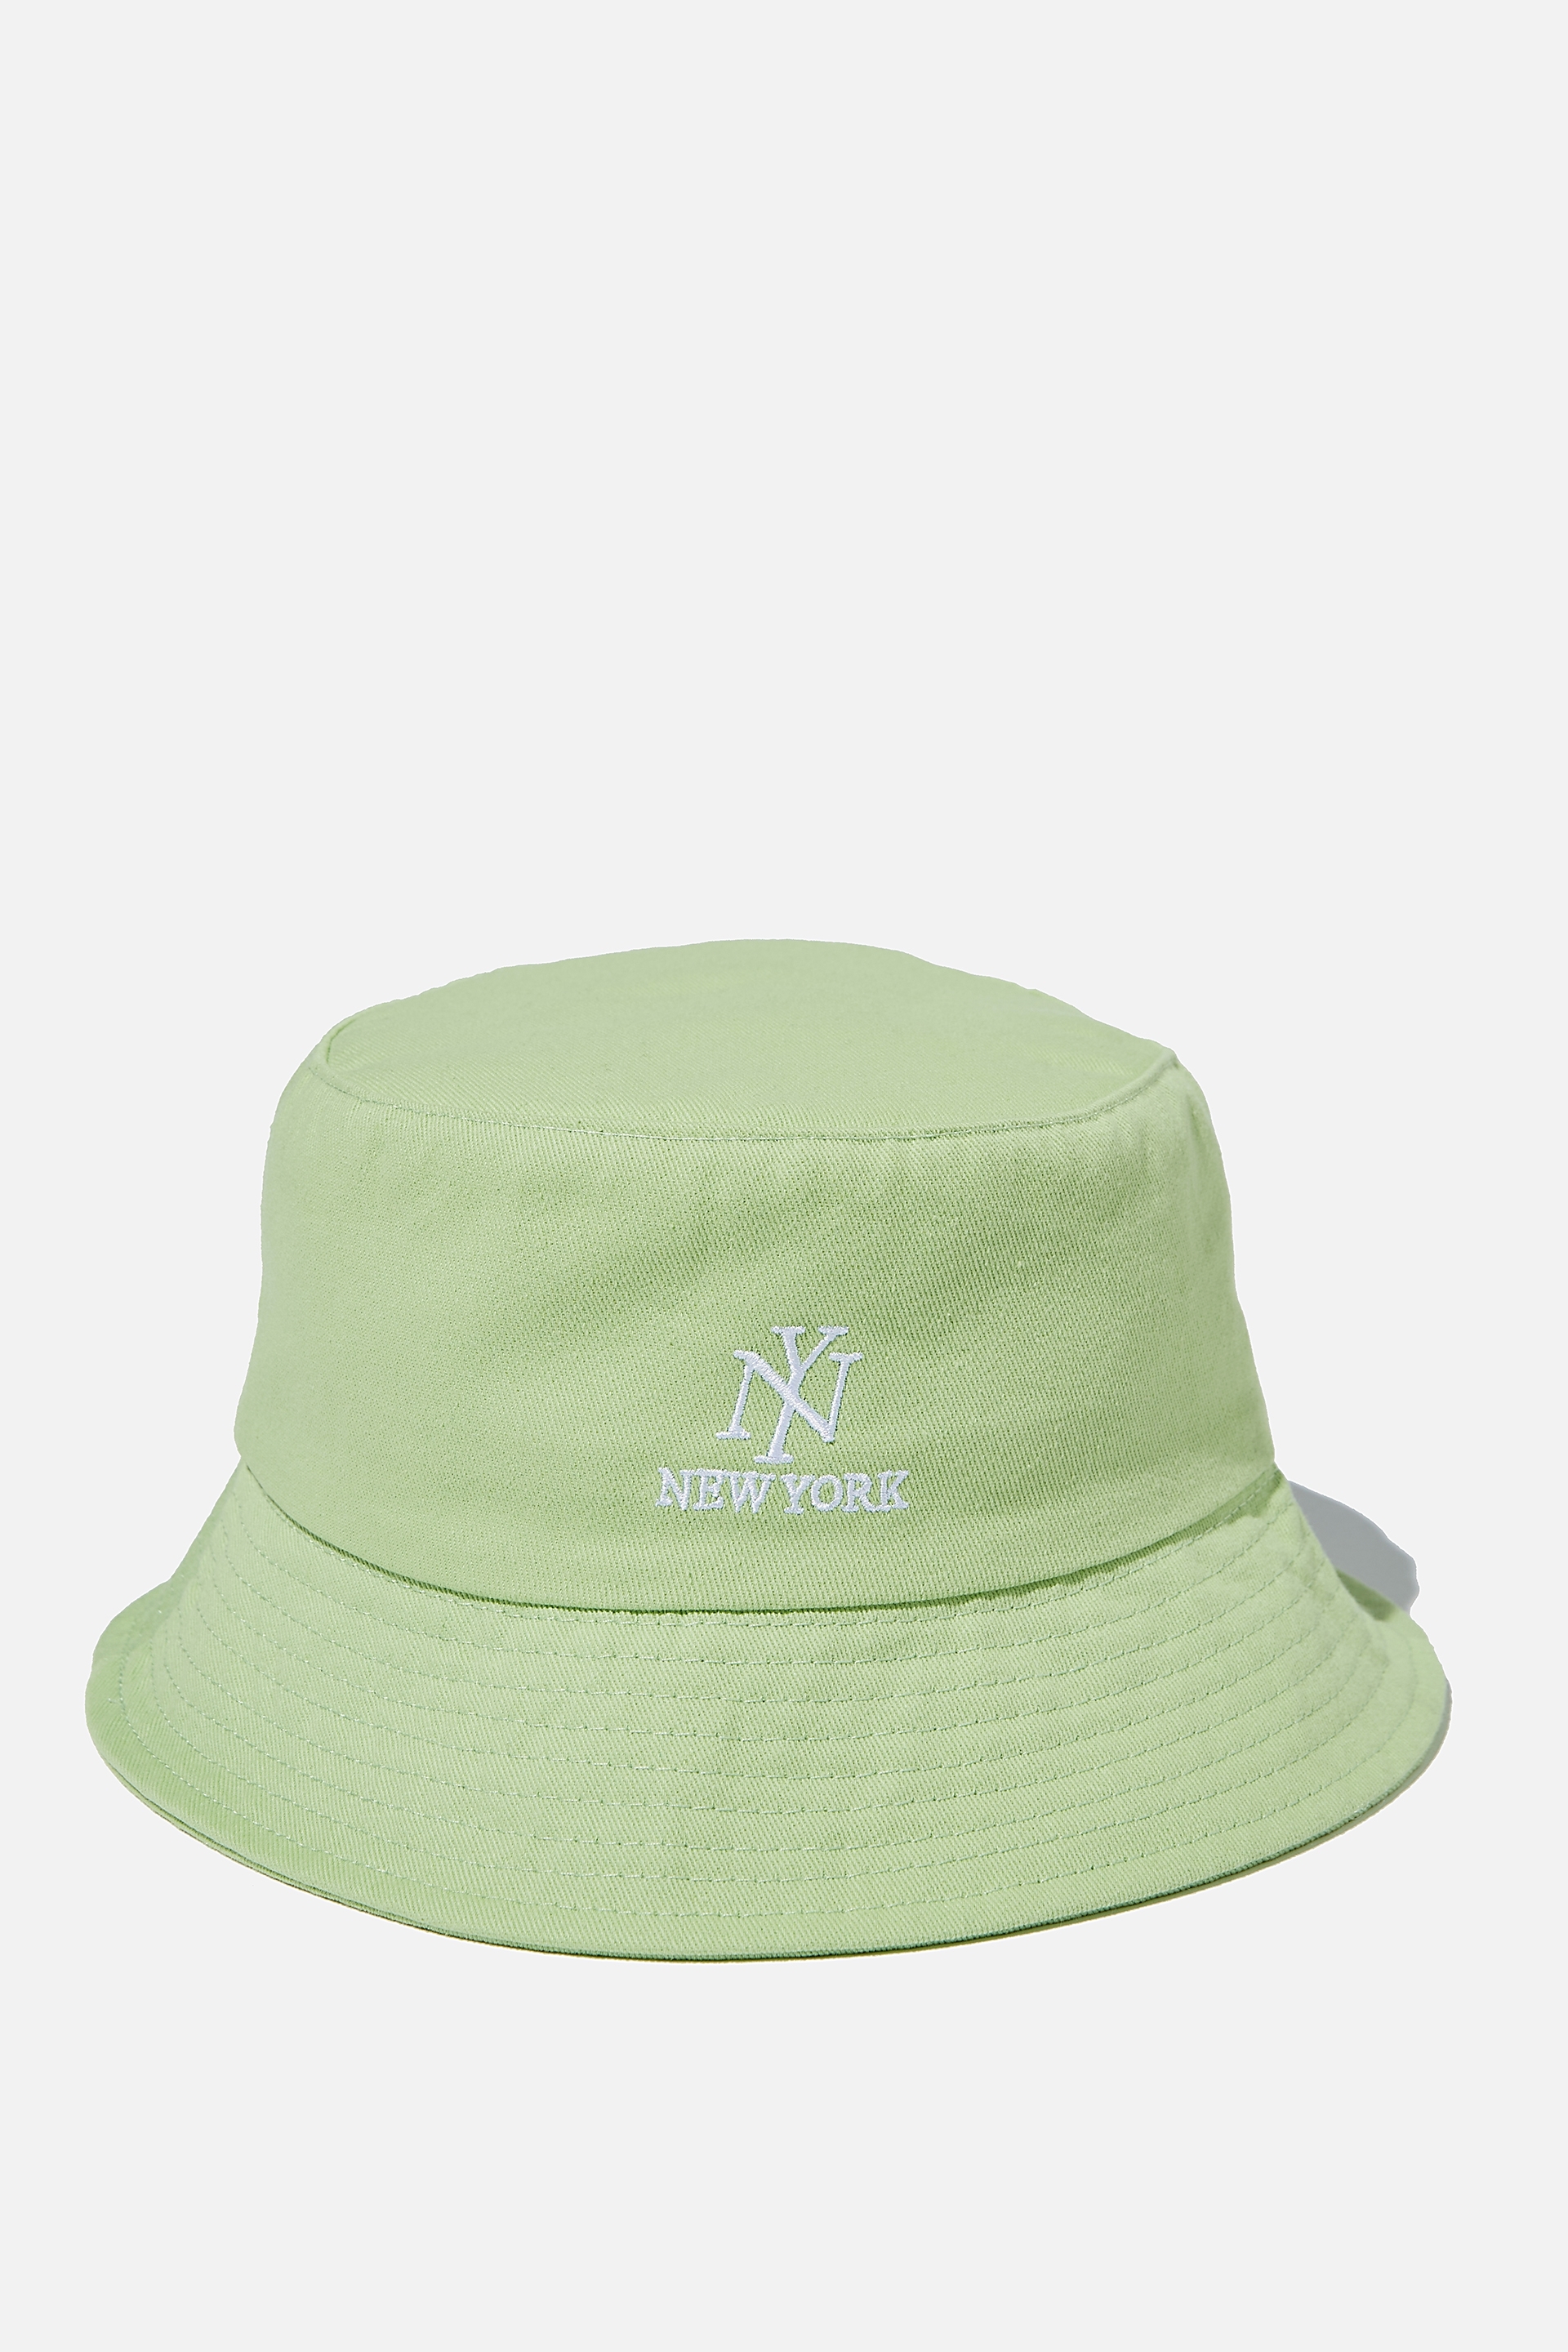 Factorie - Bucket Hat - Shadow lime/ny